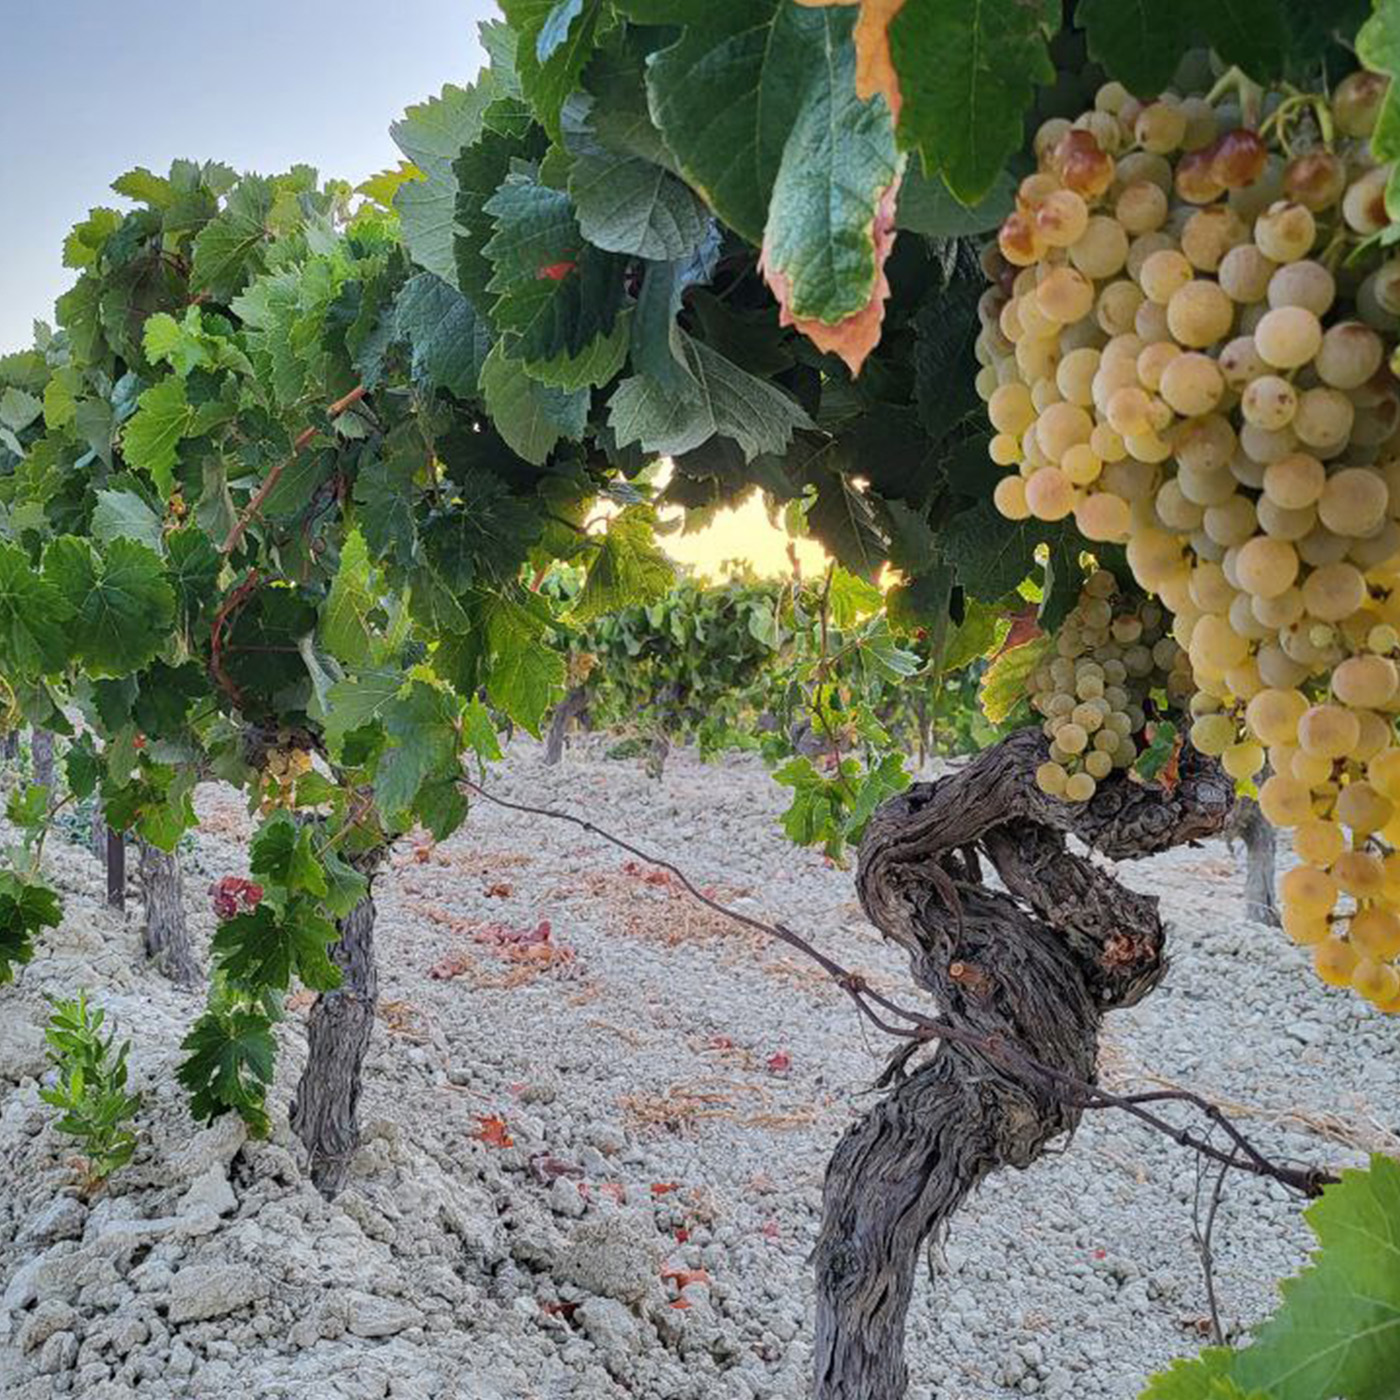 4x4 route through the vineyards of the Jerez area and winery 4 - Rutasiete